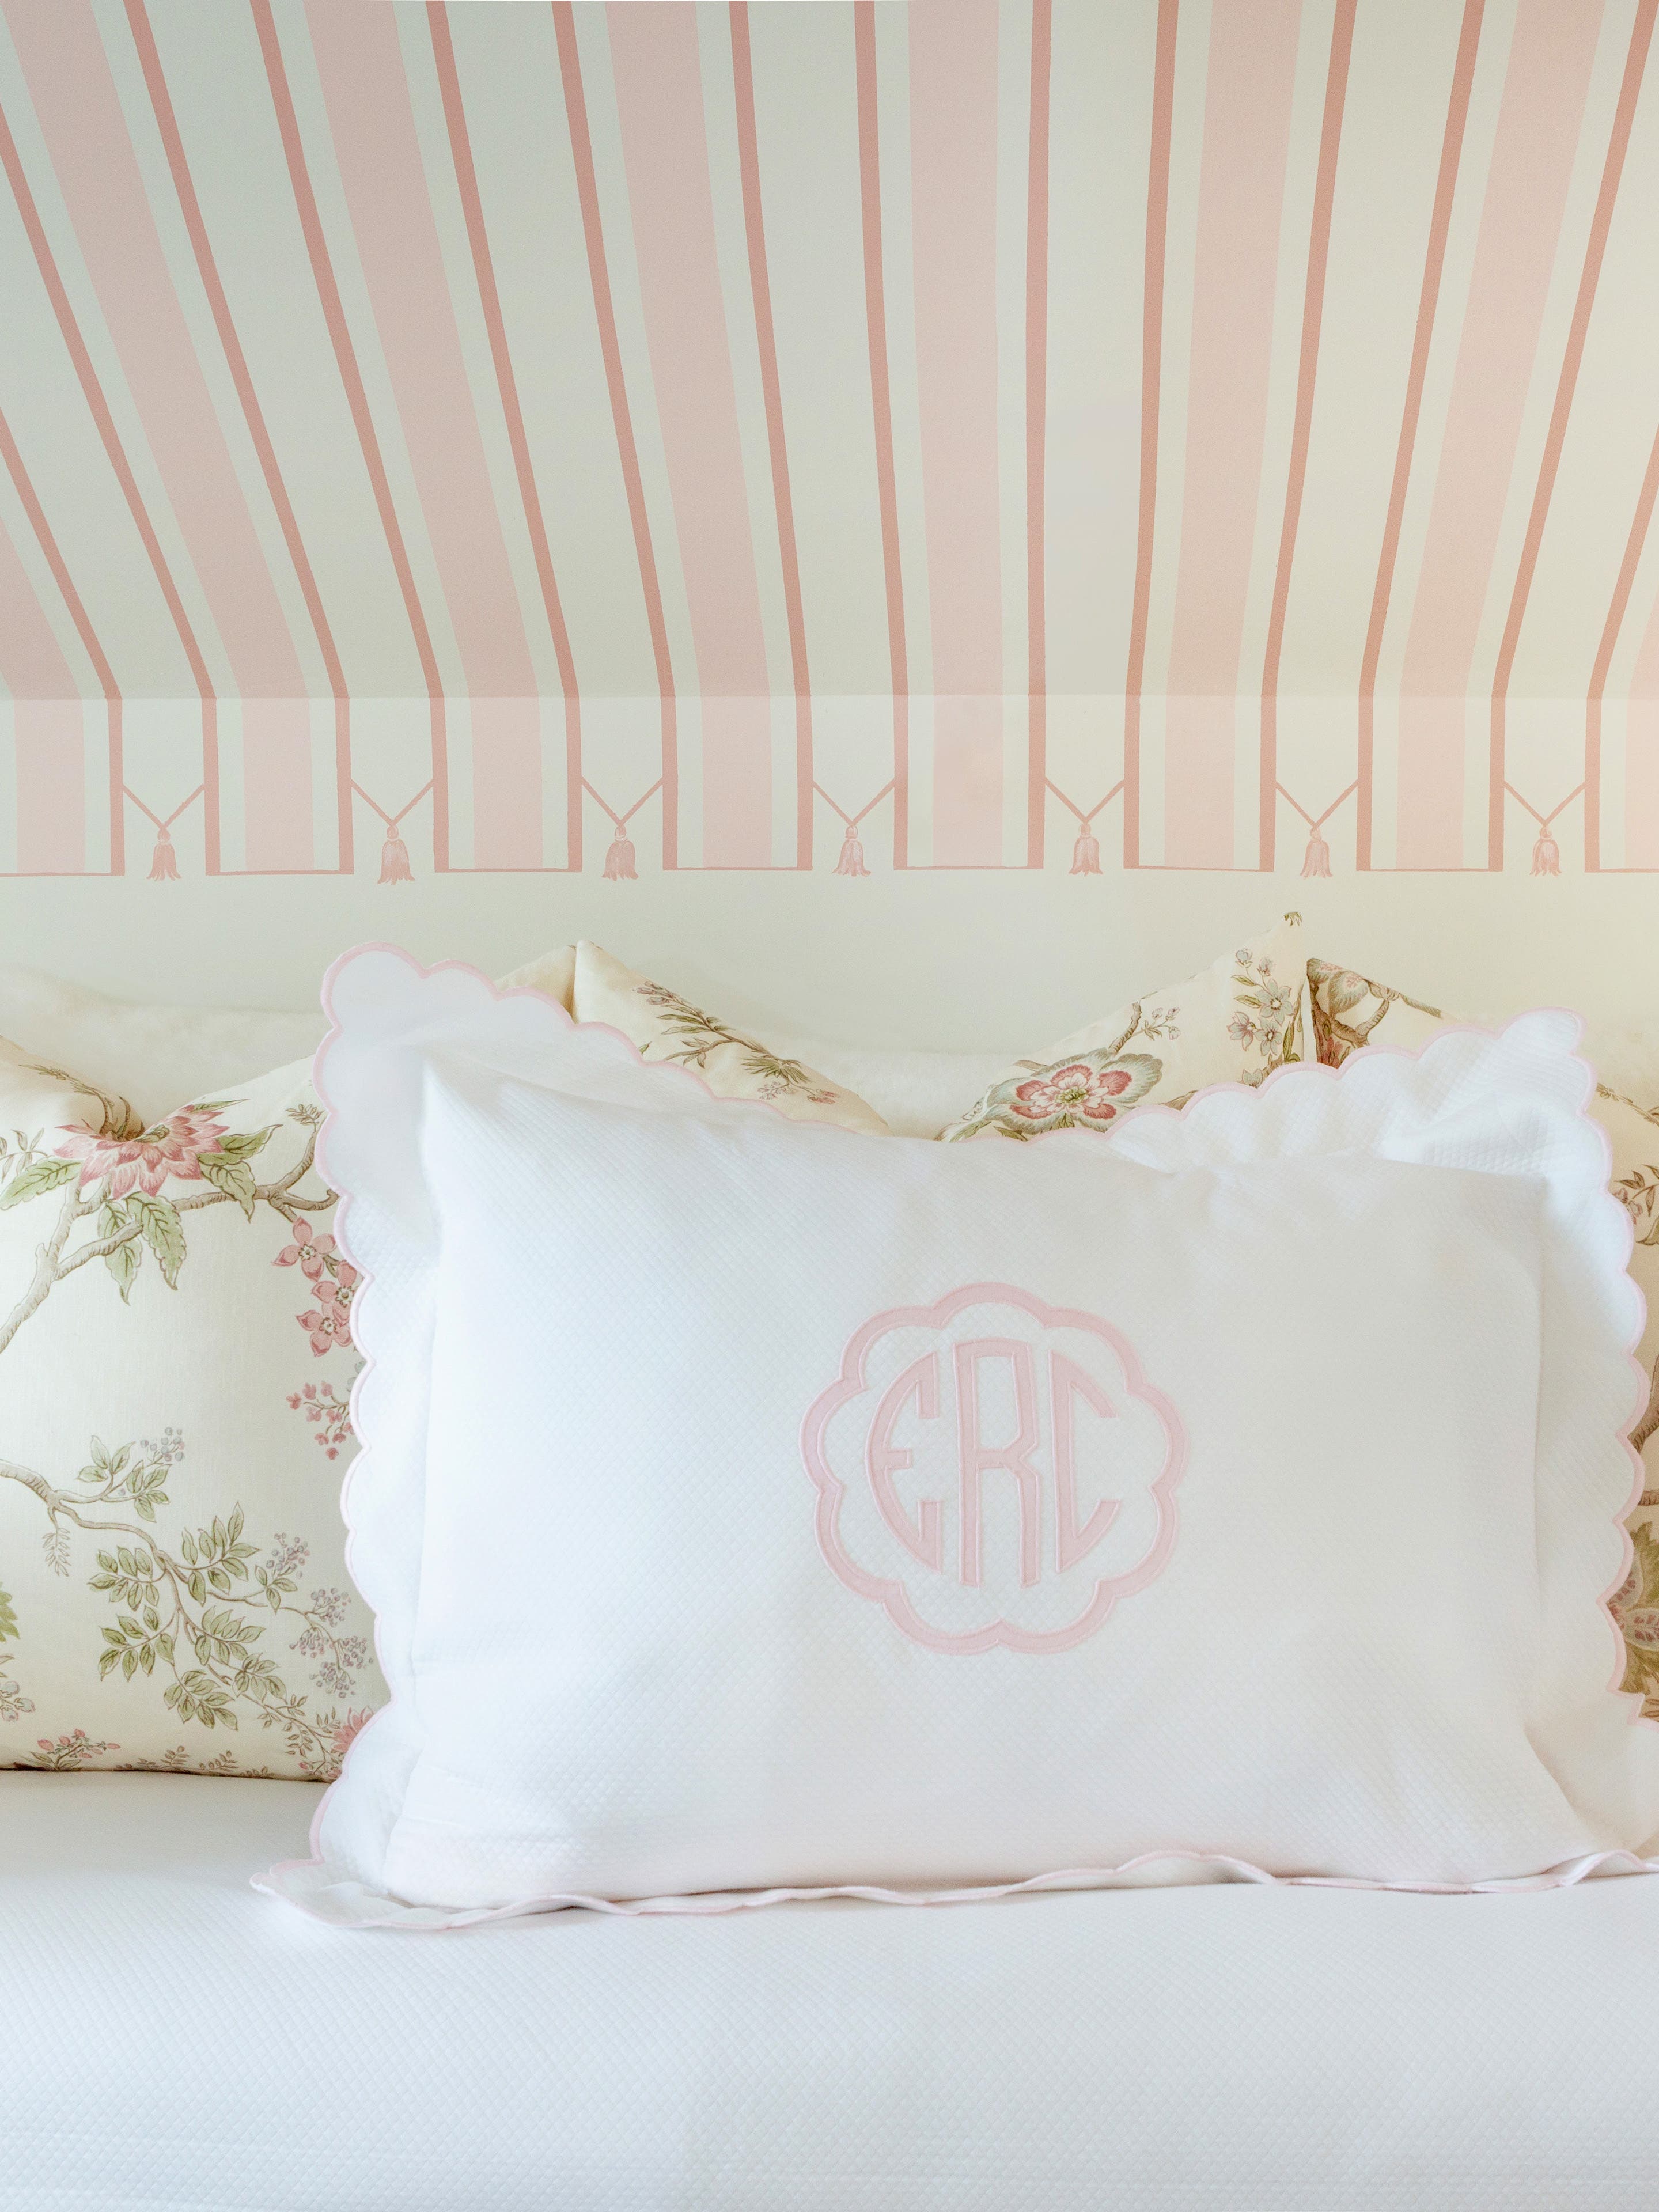 Monogramming Is Just the Start of Personalizing Your Sheets and Towels